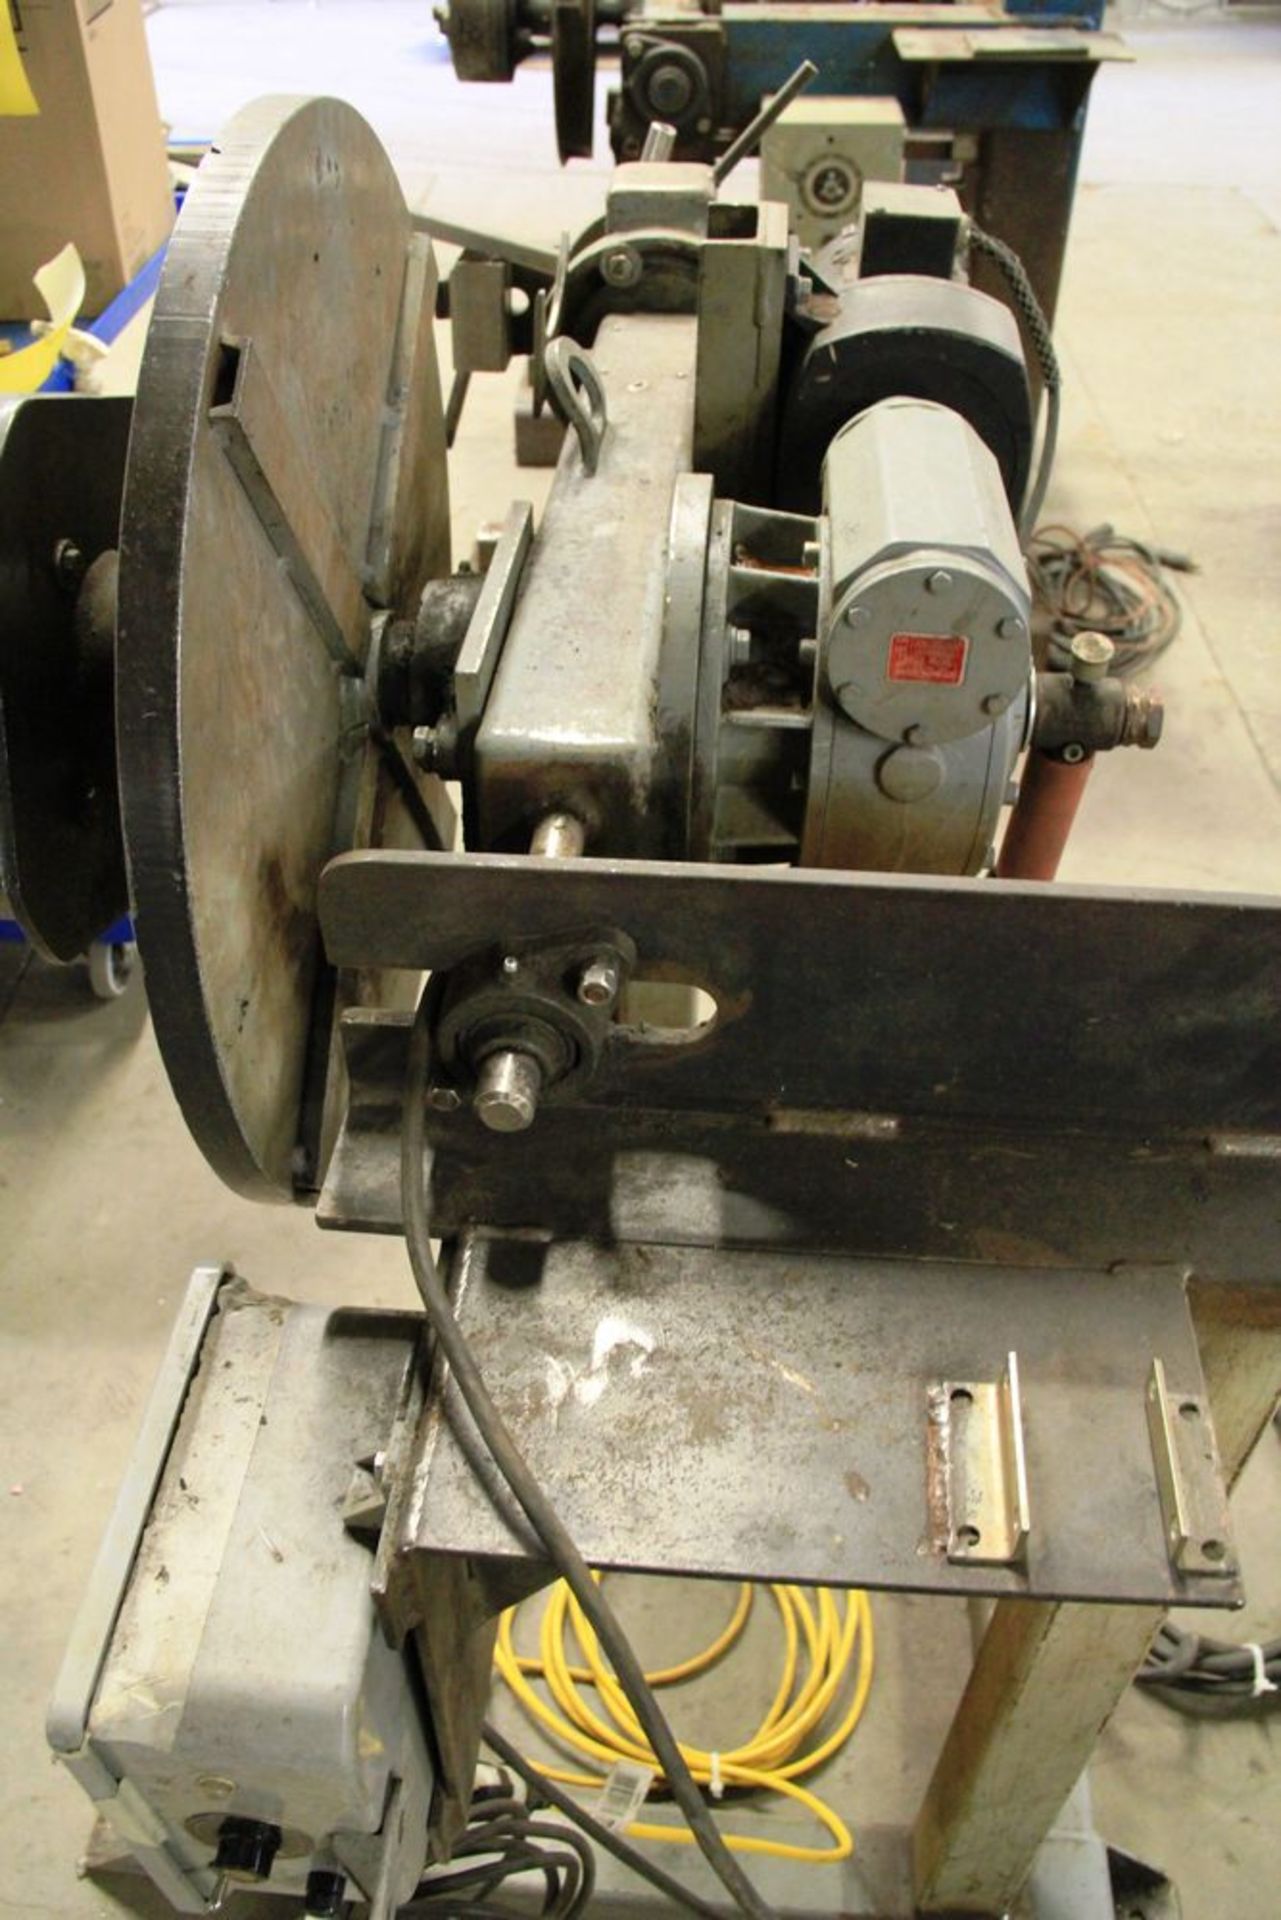 IRCO 2-2526 WELDING POSITIONER, 24" FACE PLATE, 3 JAW CHUCK, FOOT CONTROLLER, 1 PHASE, 110 AMP, - Image 2 of 3